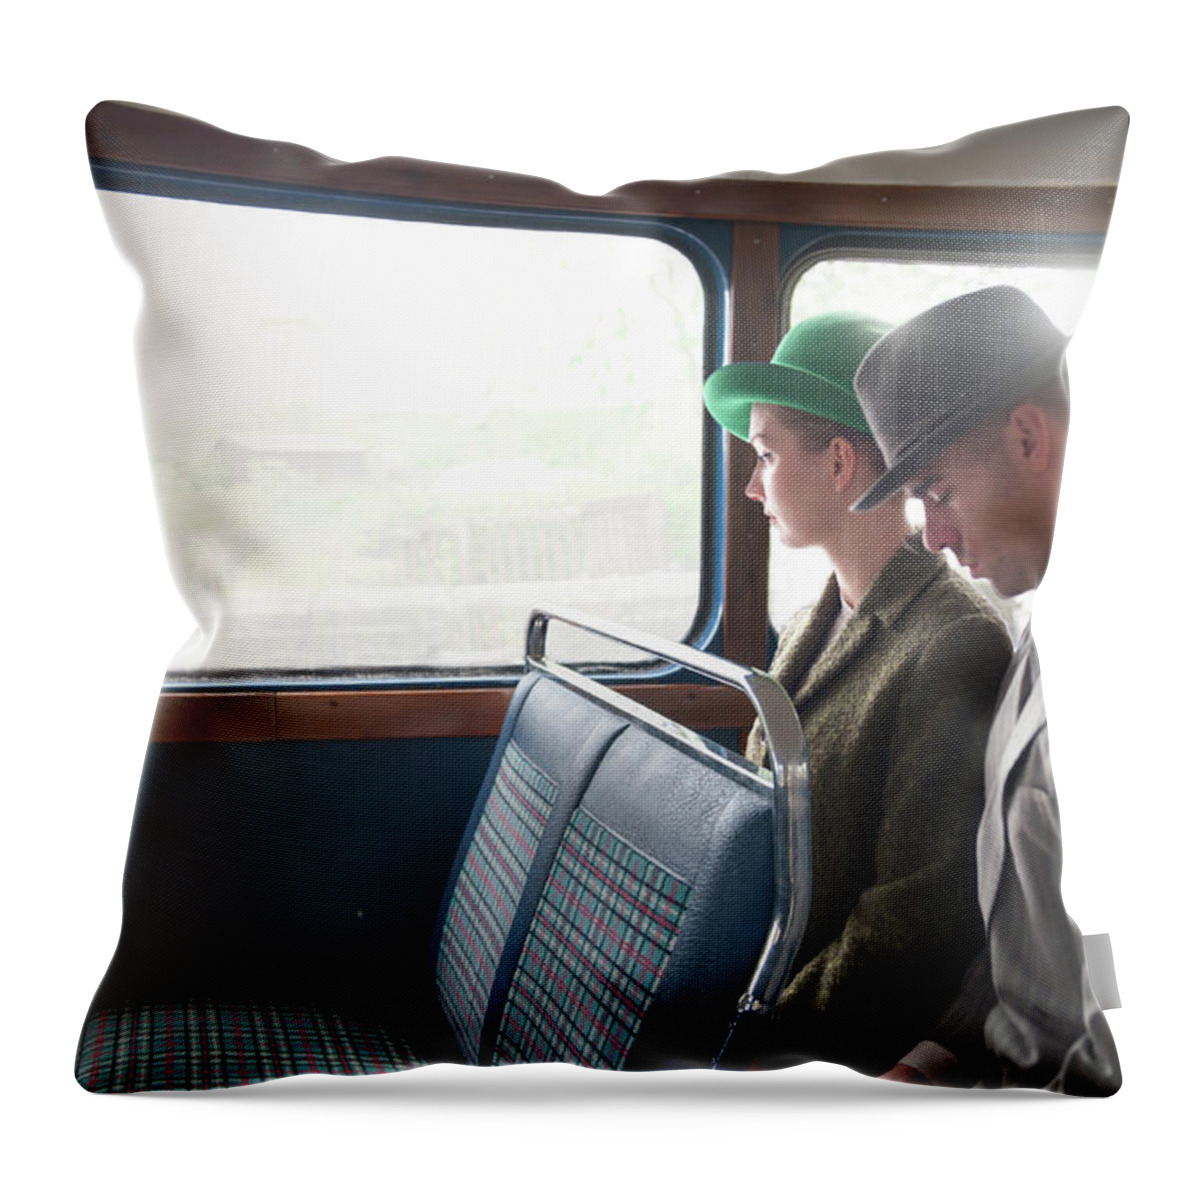 1940's Throw Pillow featuring the photograph 1940s Couple Sitting On A Vintage Bus by Lee Avison